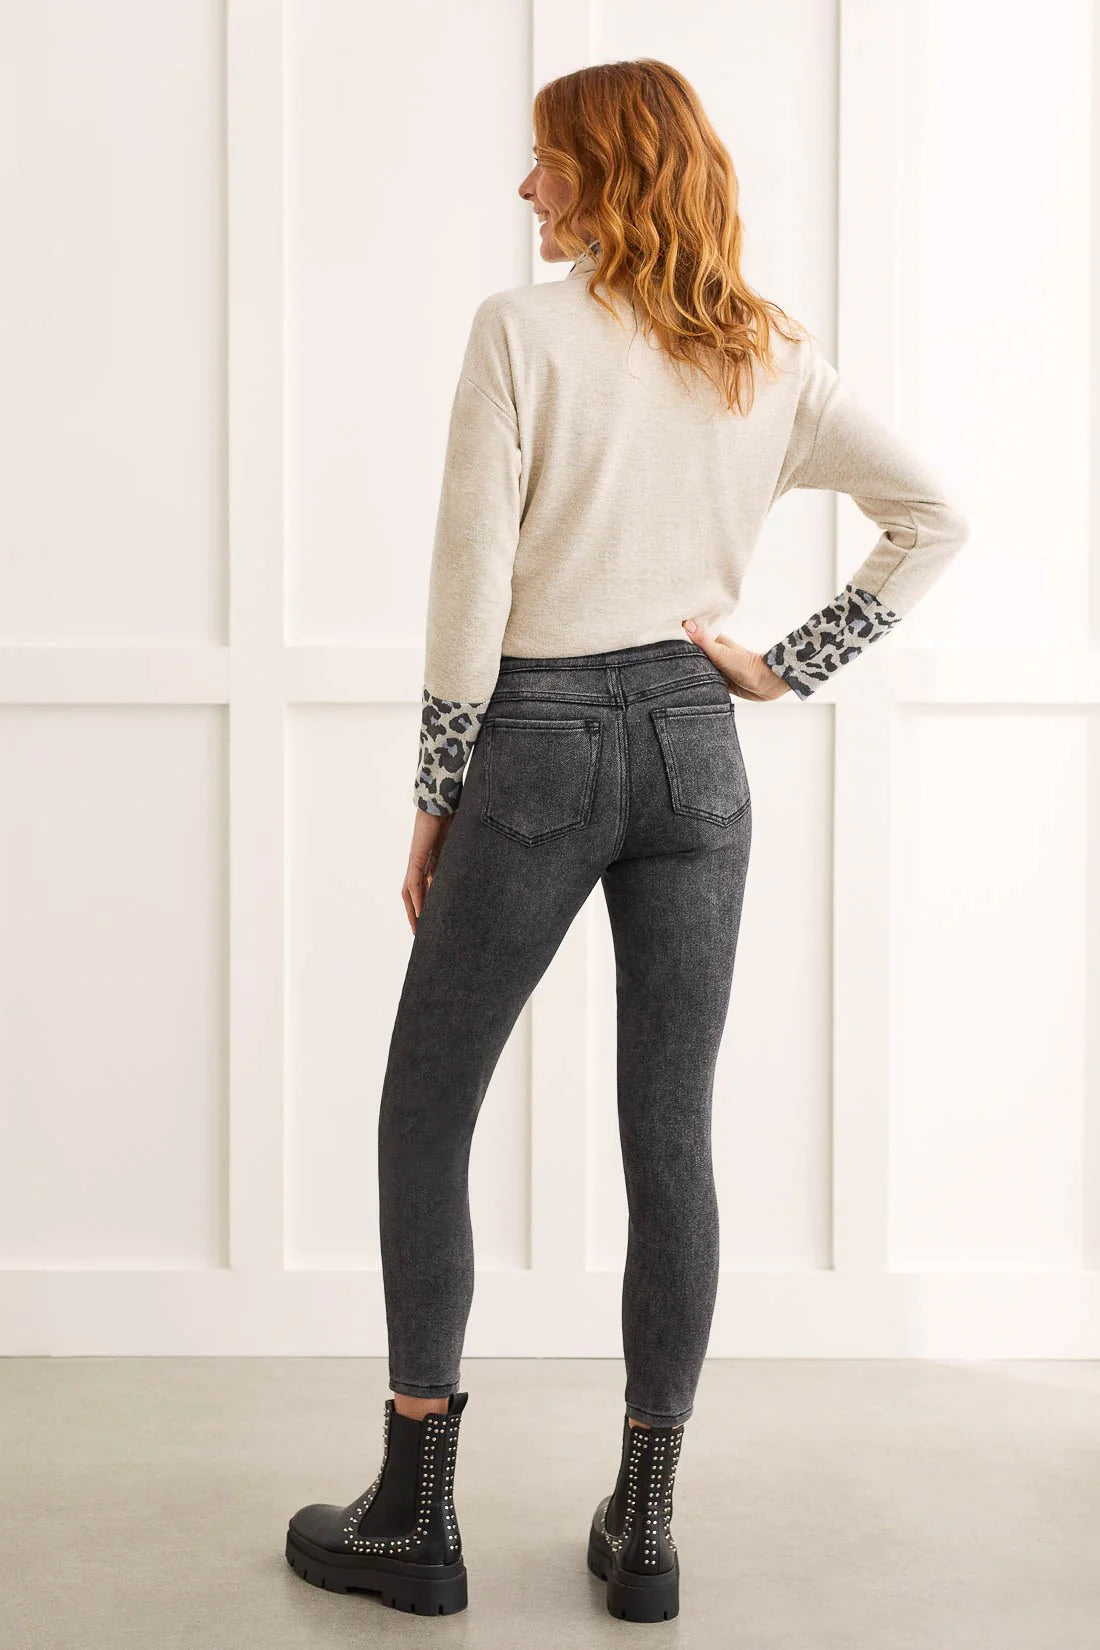 This legging offers a comfortable fit and offers tummy tucking power to help you look sleek and slim. An essential for any wardrobe, it's the perfect way to stay stylish while keeping you feeling comfortable all day long!